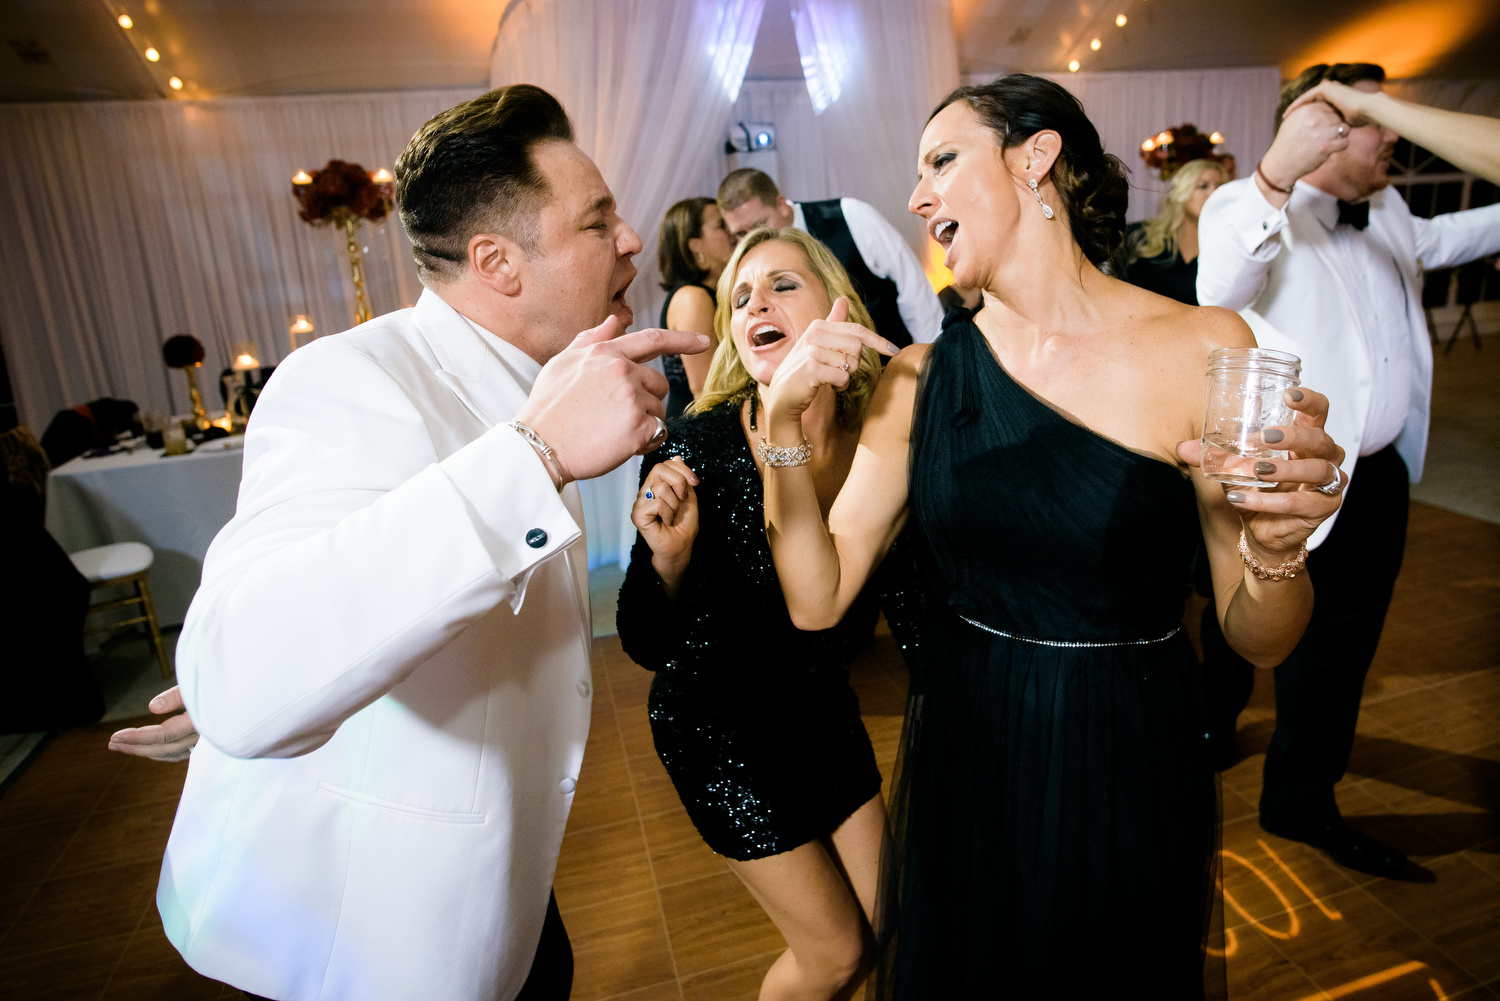 Funny dance floor moment during a wedding at at Heritage Prairie Farm.